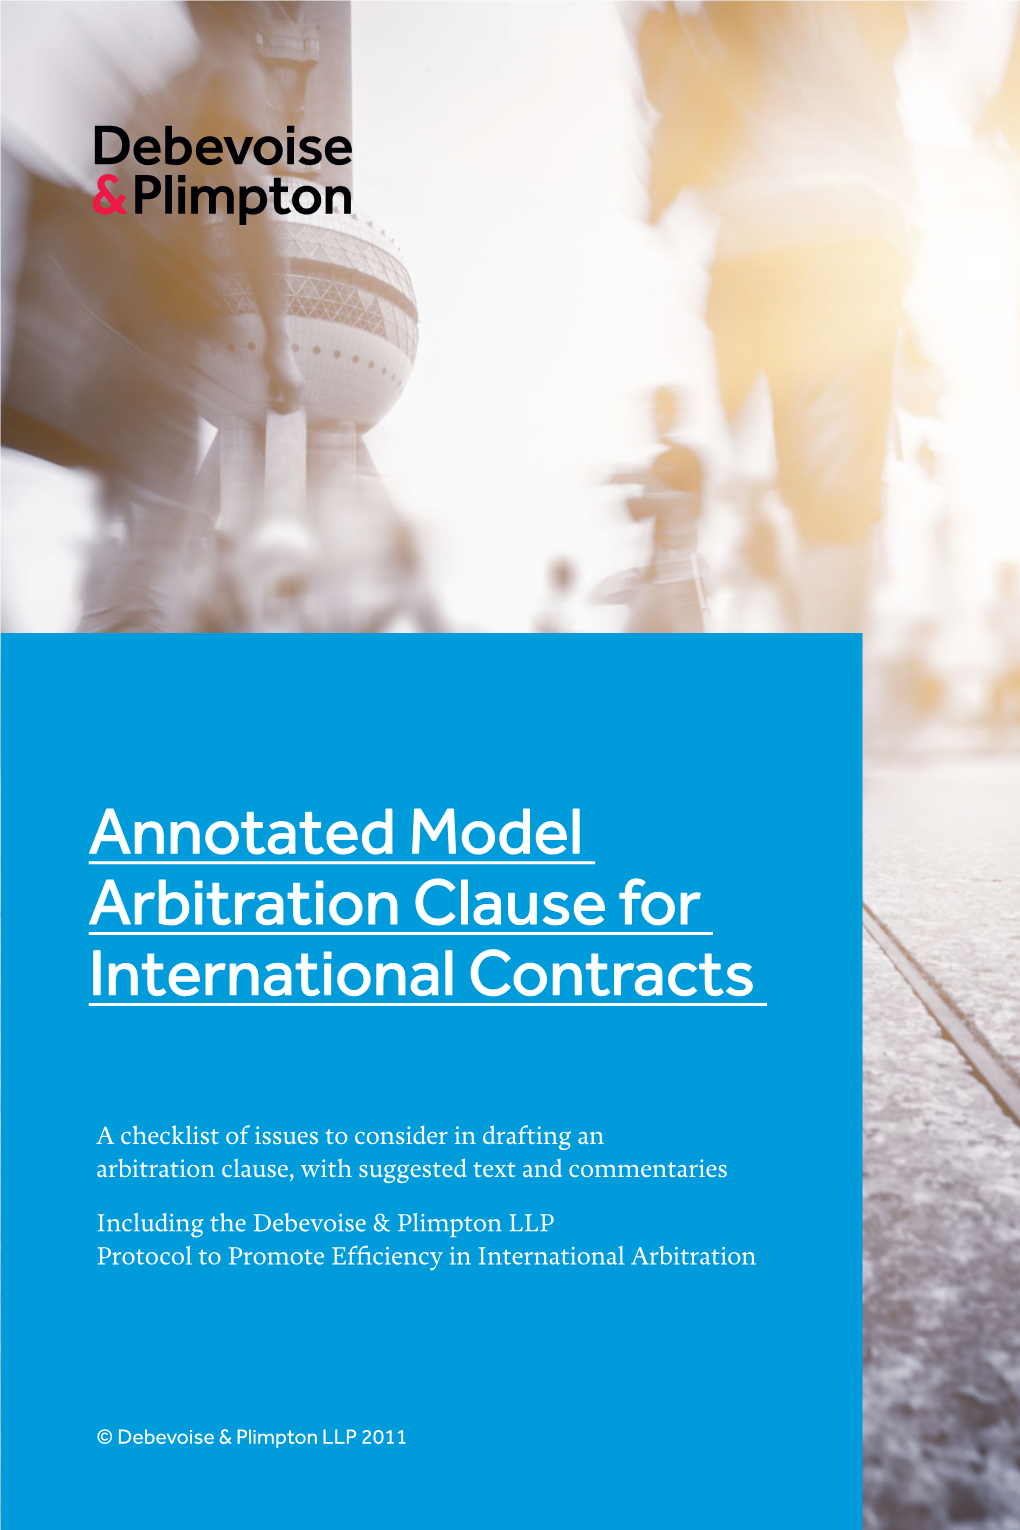 Annotated Model Arbitration Clause for International Contracts